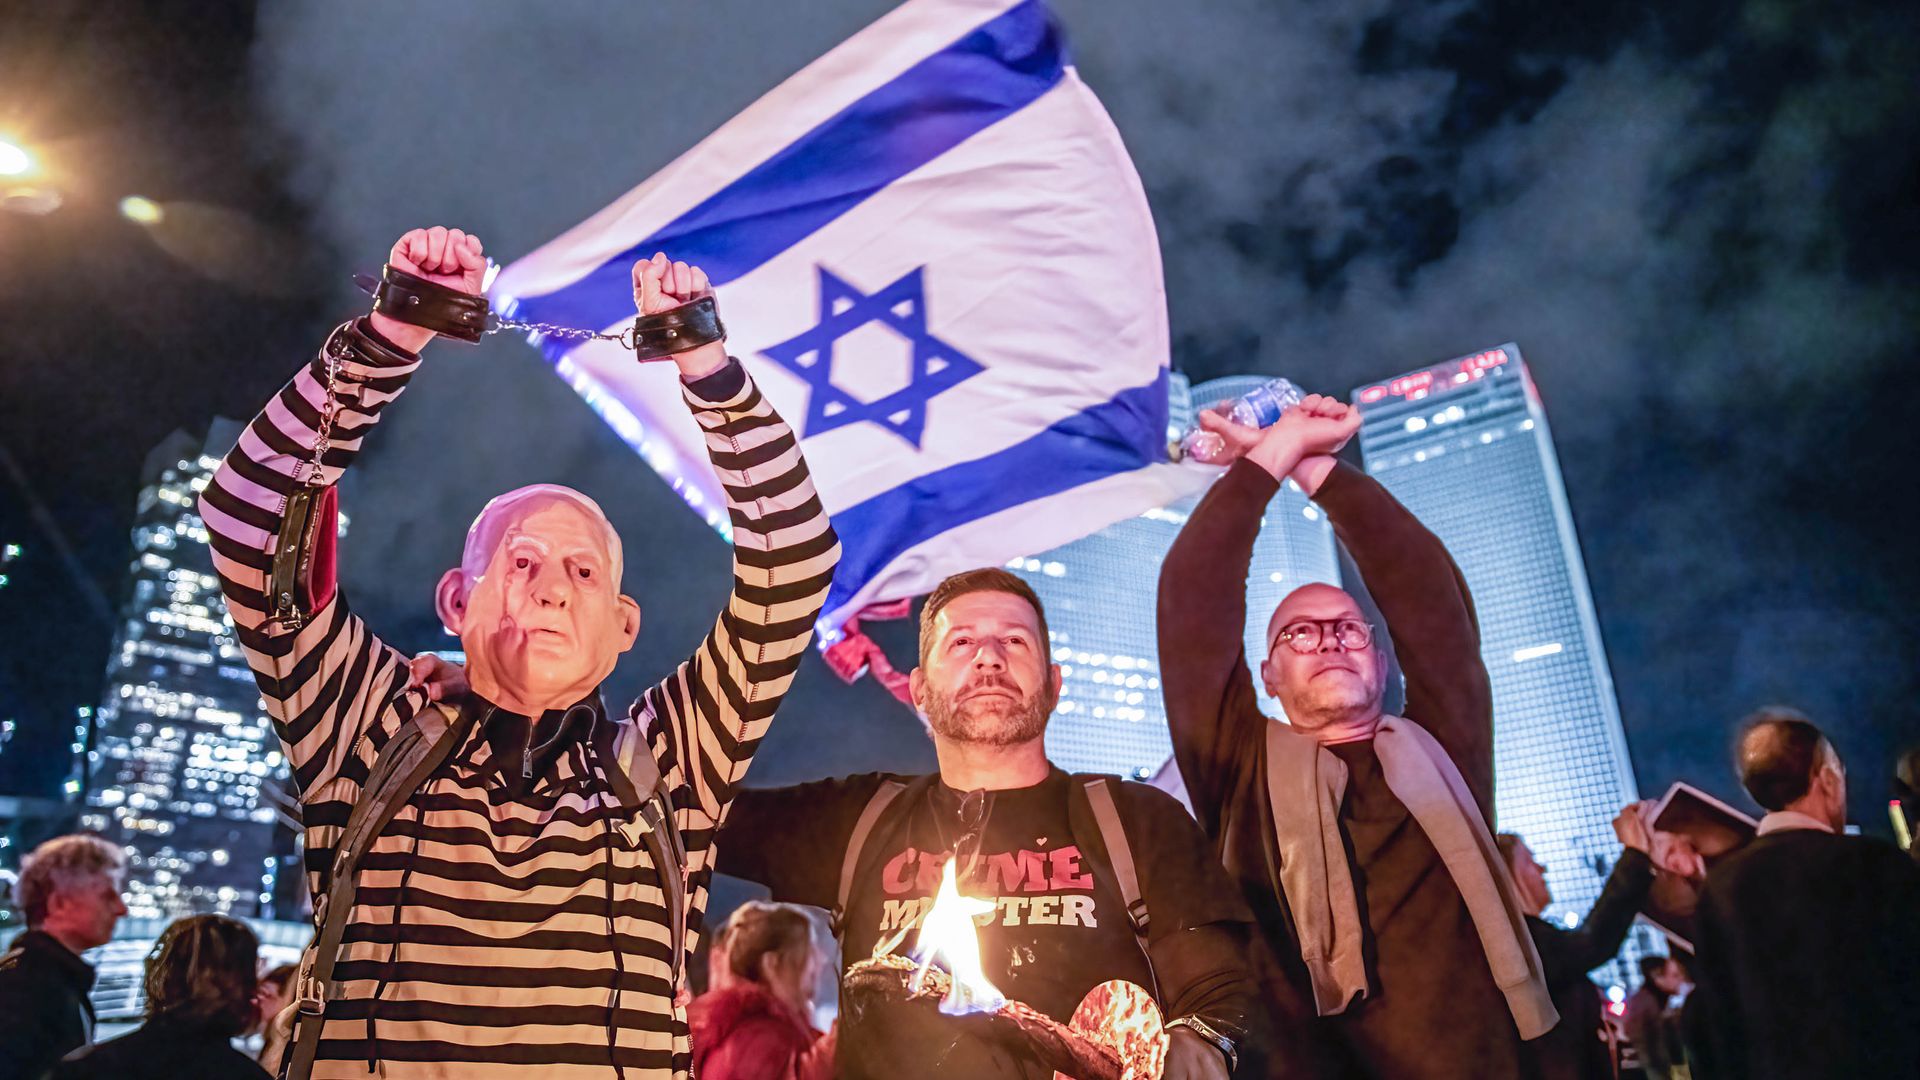  Thousands rally in Tel Aviv to protest against Netanyahus far-right government and judicial overhaul. (Photo by Matan Golan/SOPA Images/LightRocket via Getty Images)